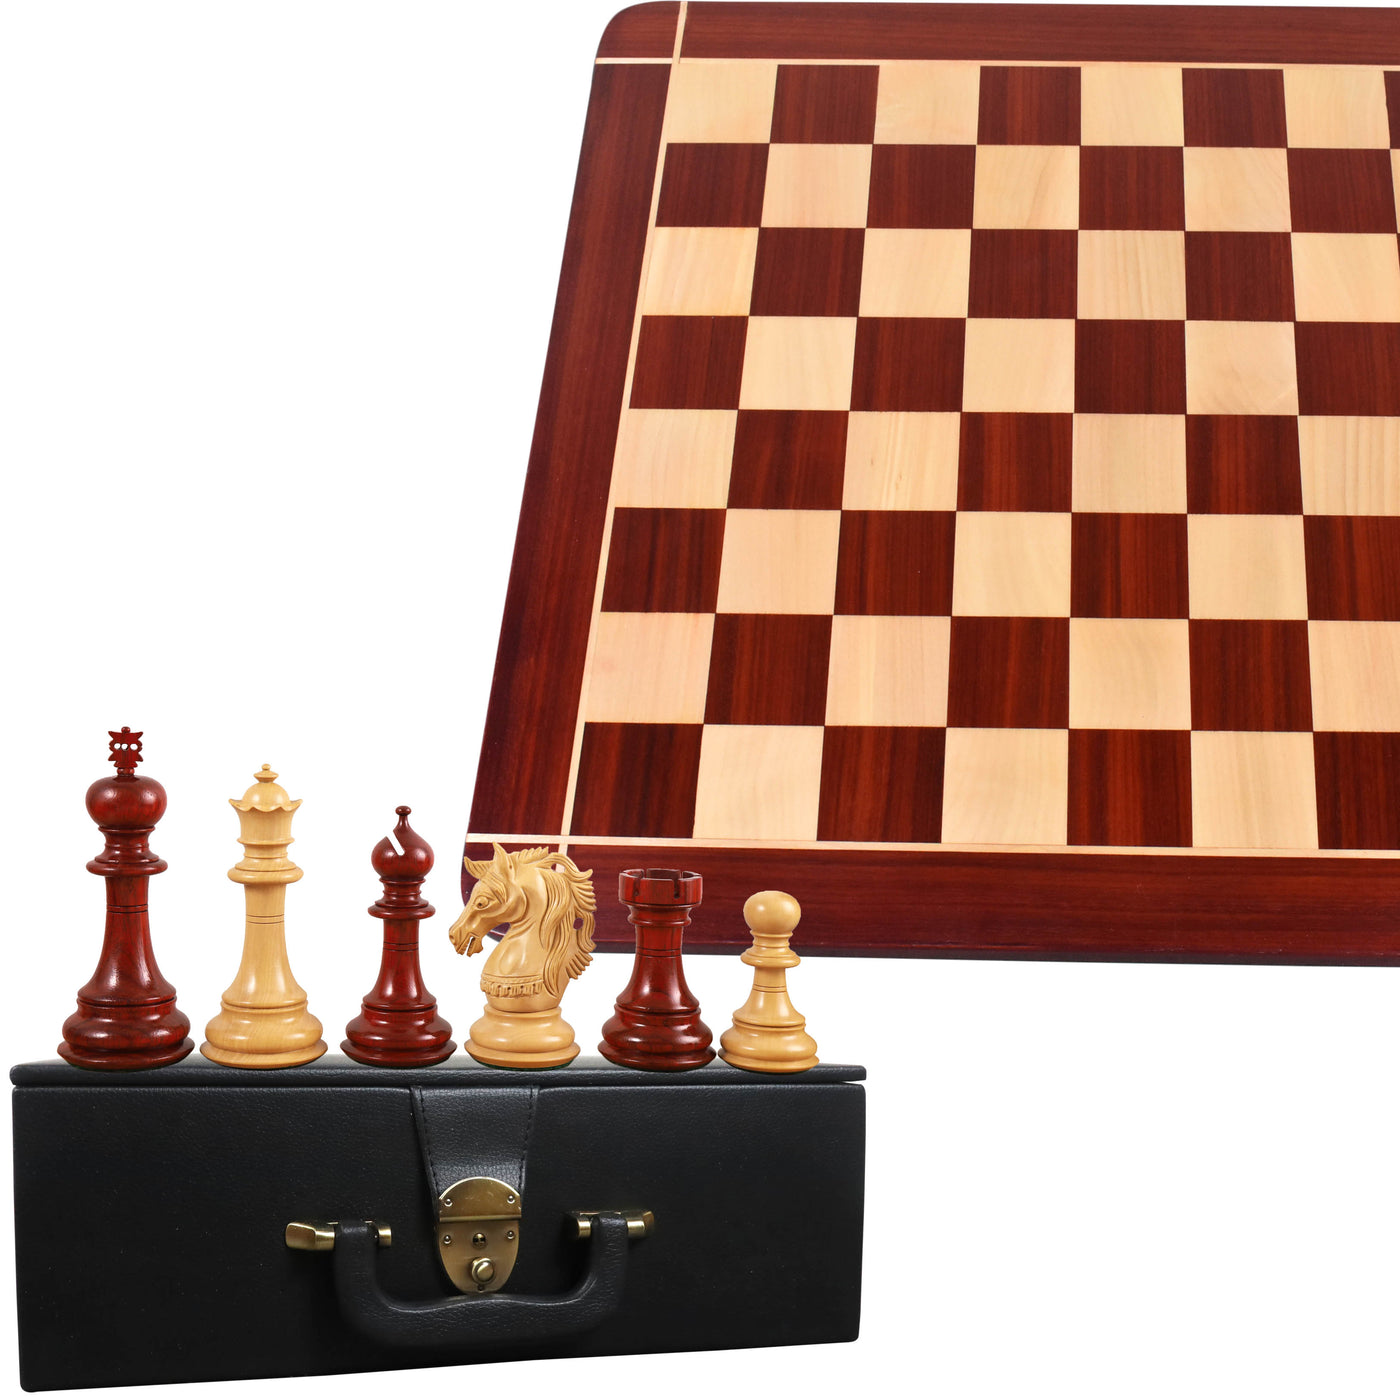 Combo of 4.6" Prestige Luxury Staunton Chess Set - Pieces in Bud Rosewood with Board and Box